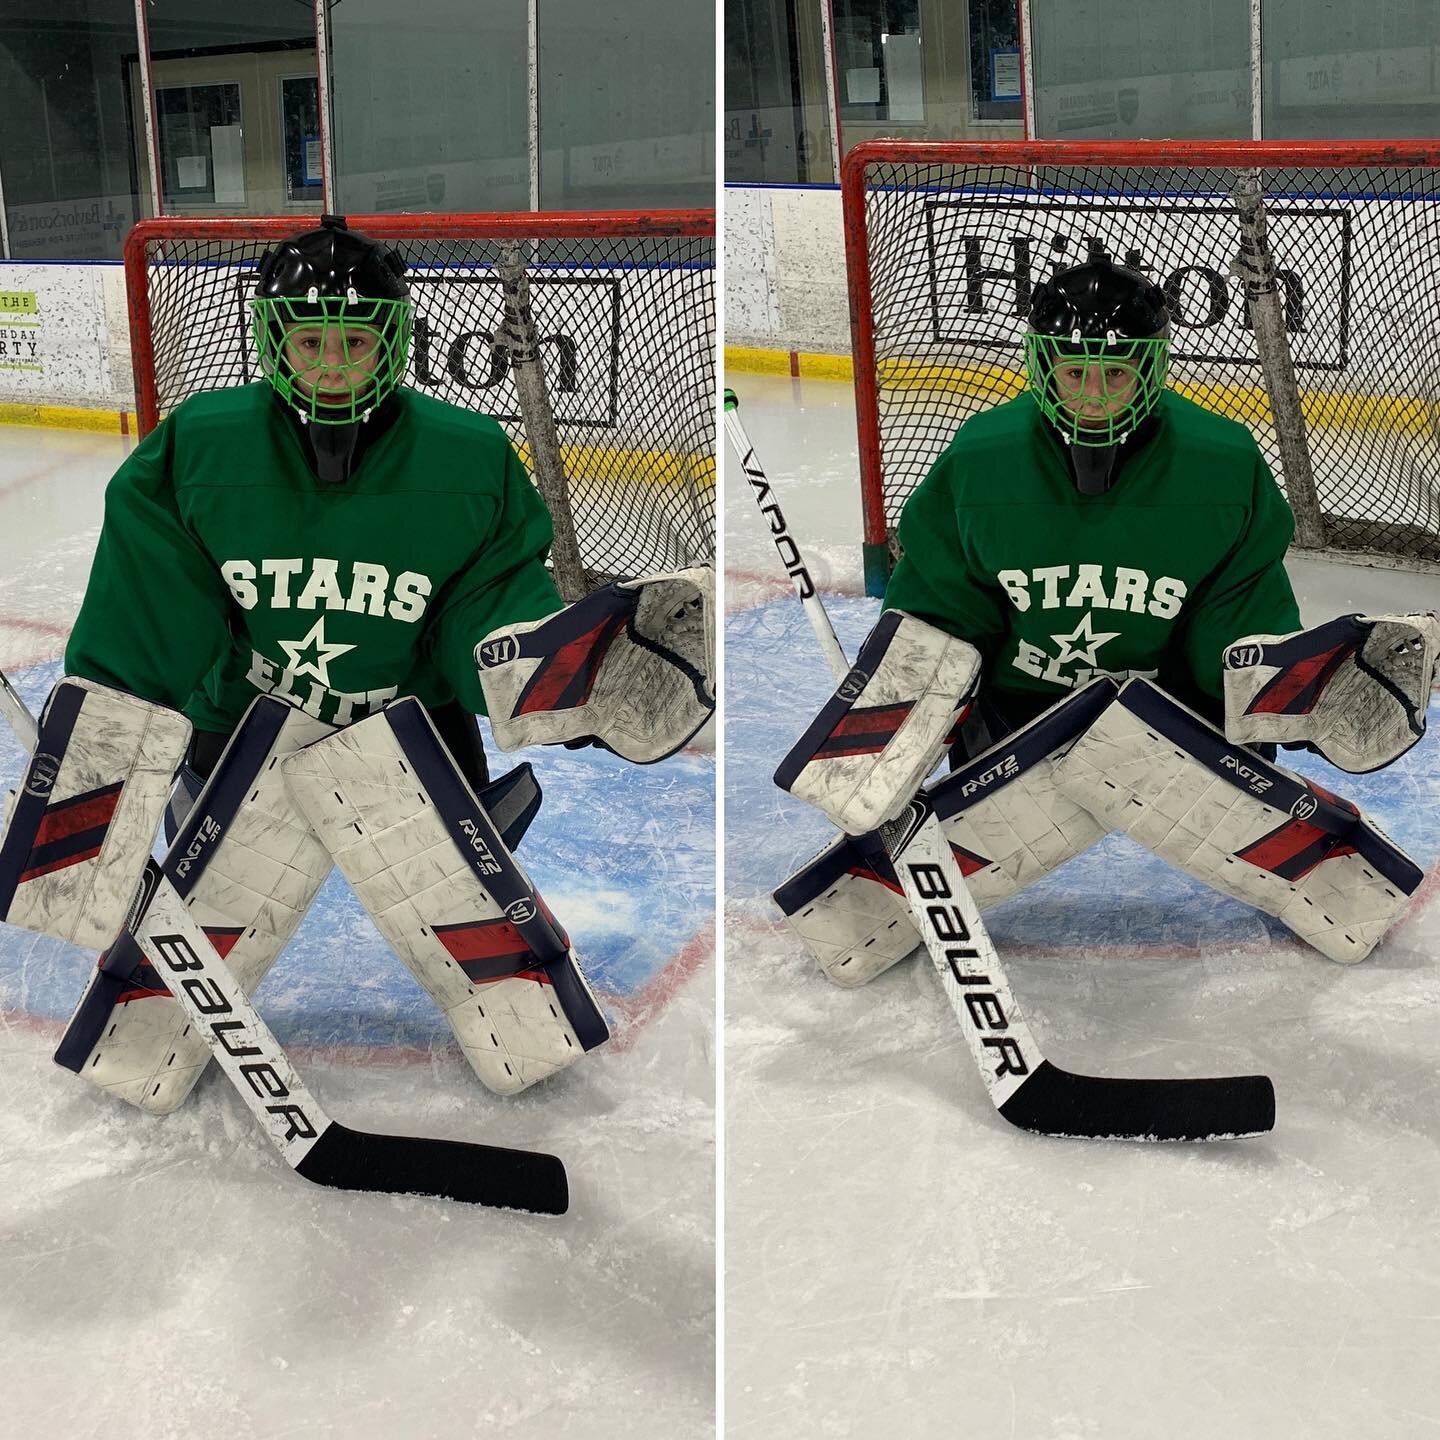 2010 goalie Bennett showing off two important stances. On the left is the movement stance where a goalie is ready to go wherever game play indicates. On the right is his stance positioning to make a save. 

#goalie #goalietraining #goalielife #goalie